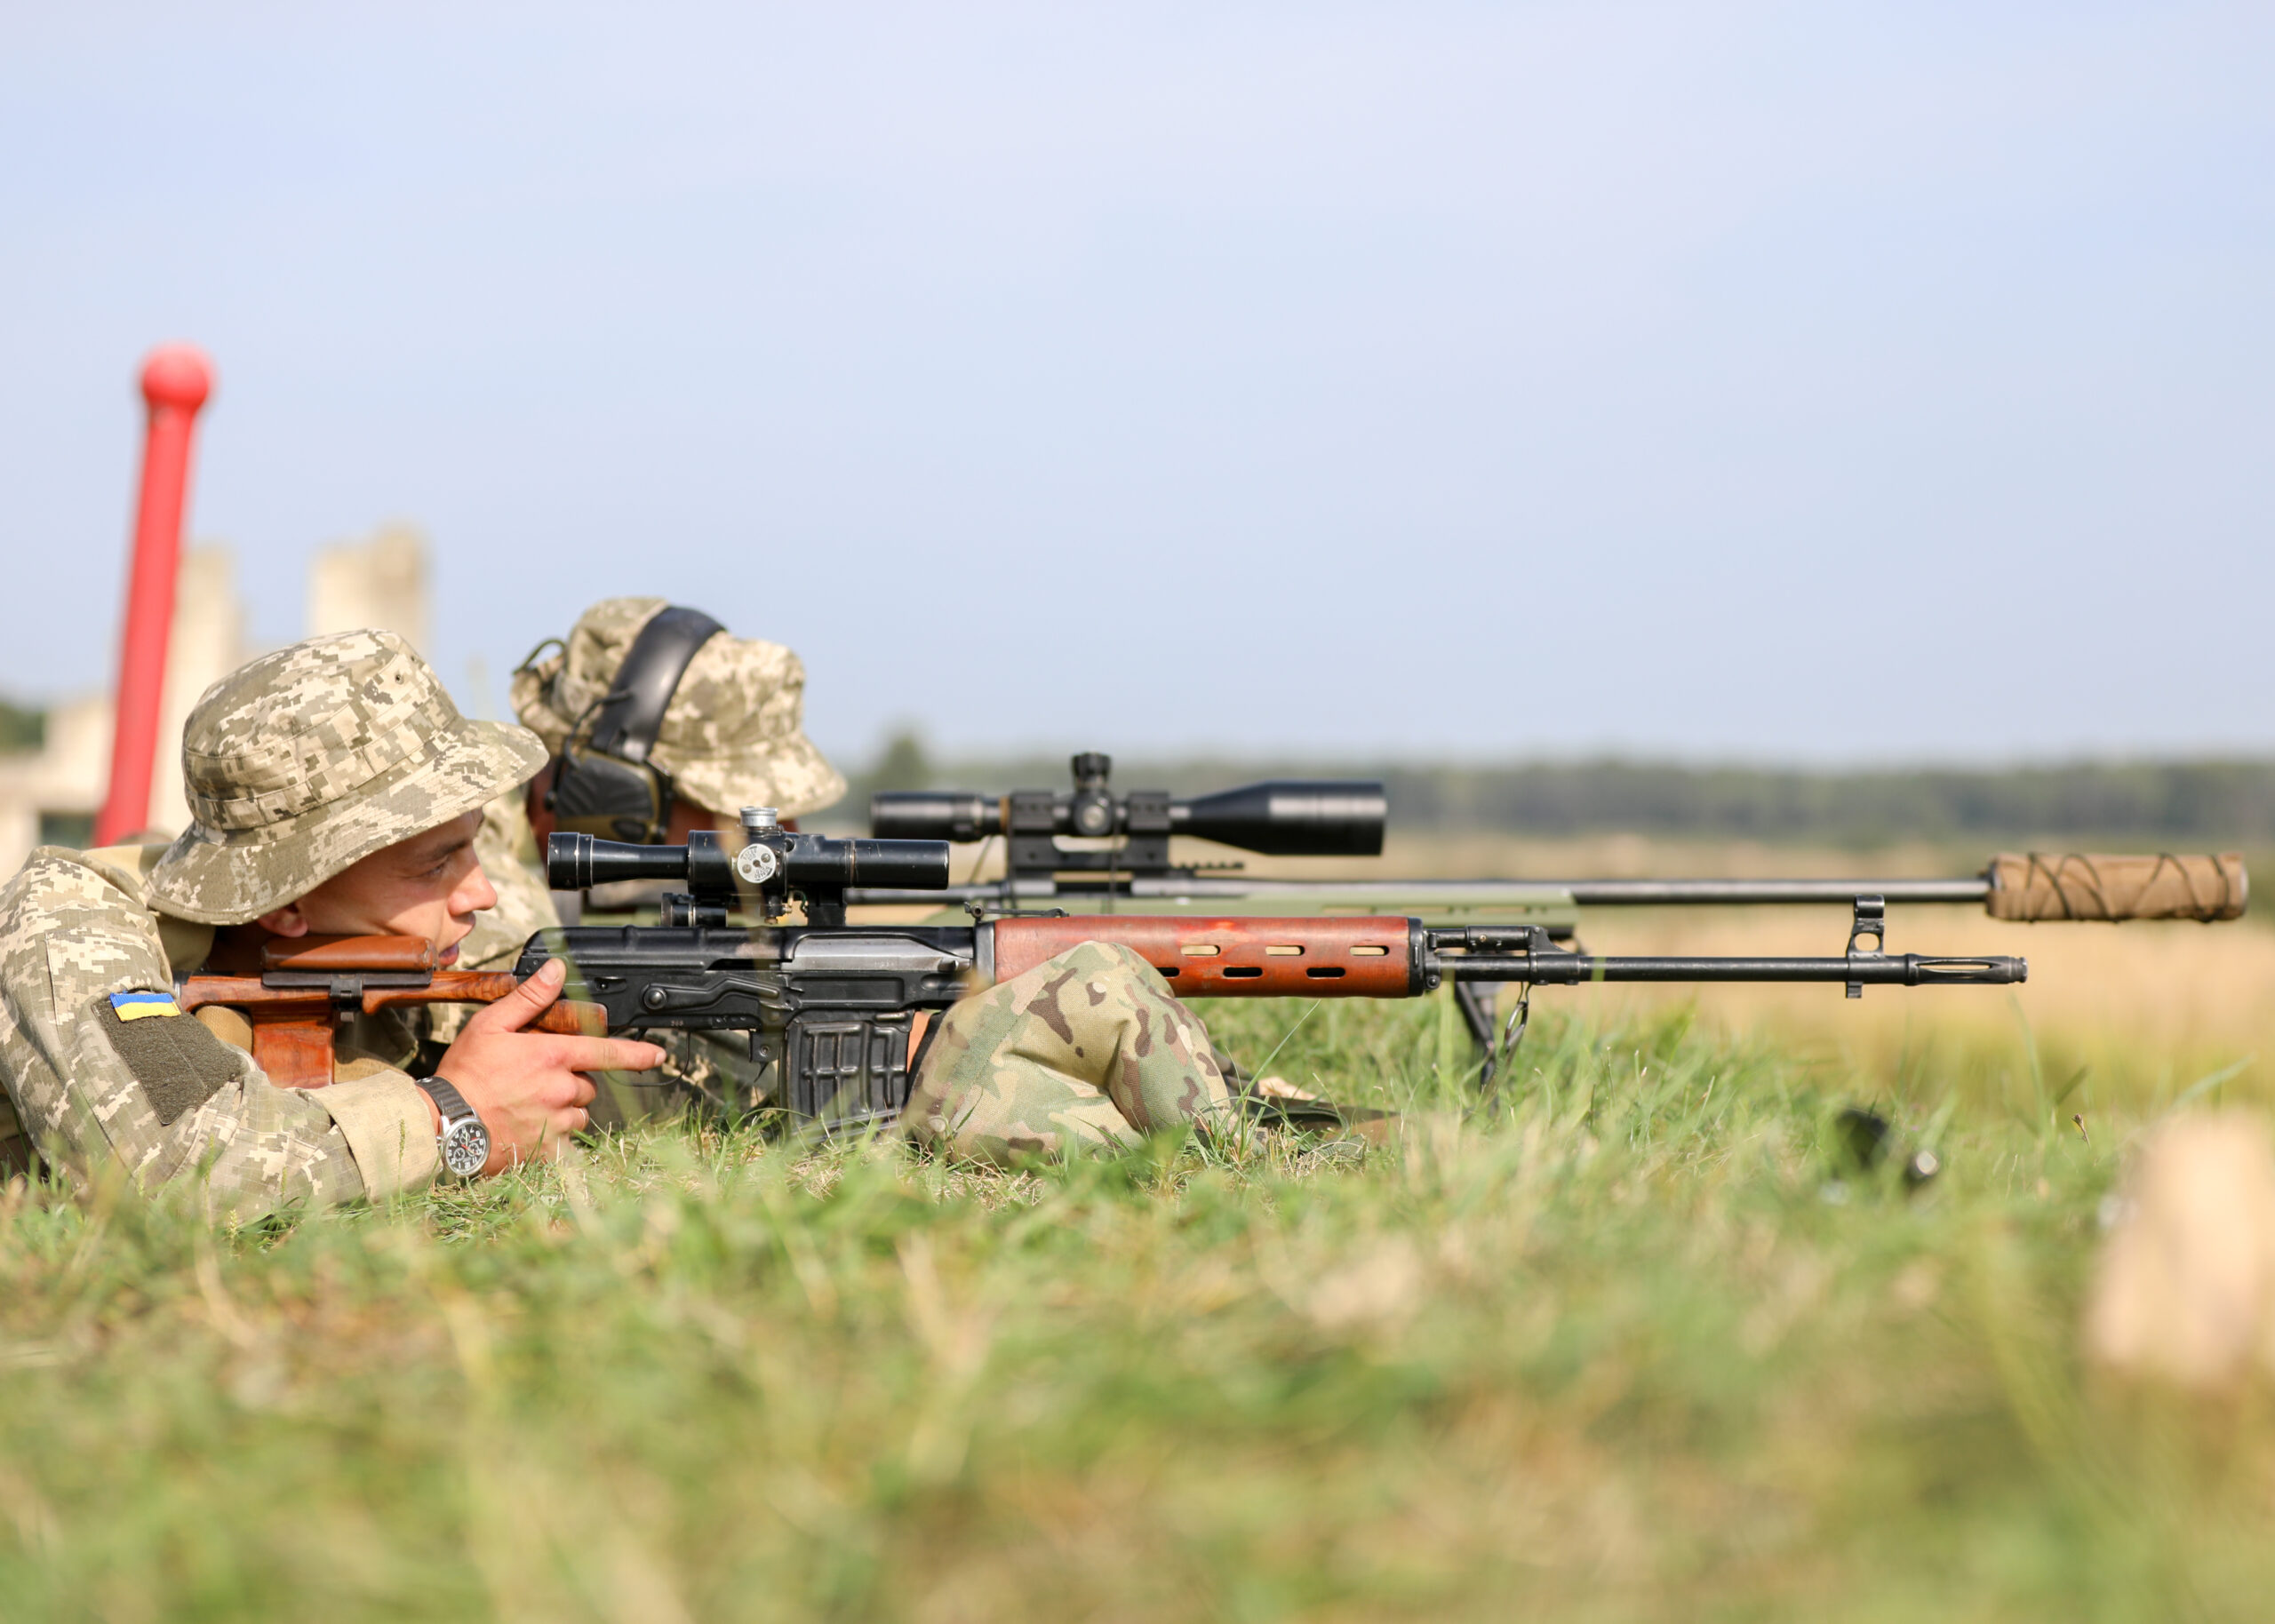 Soldiers of Task Force Carentan joined Combat Training Center-Yavoriv OC/T's and the 10th Mountain Assault Brigade as they conducted marksmanship training with the SVD and M700 sniper rifles, Aug. 29. (U.S. Army photo by Sgt. Justin Navin)